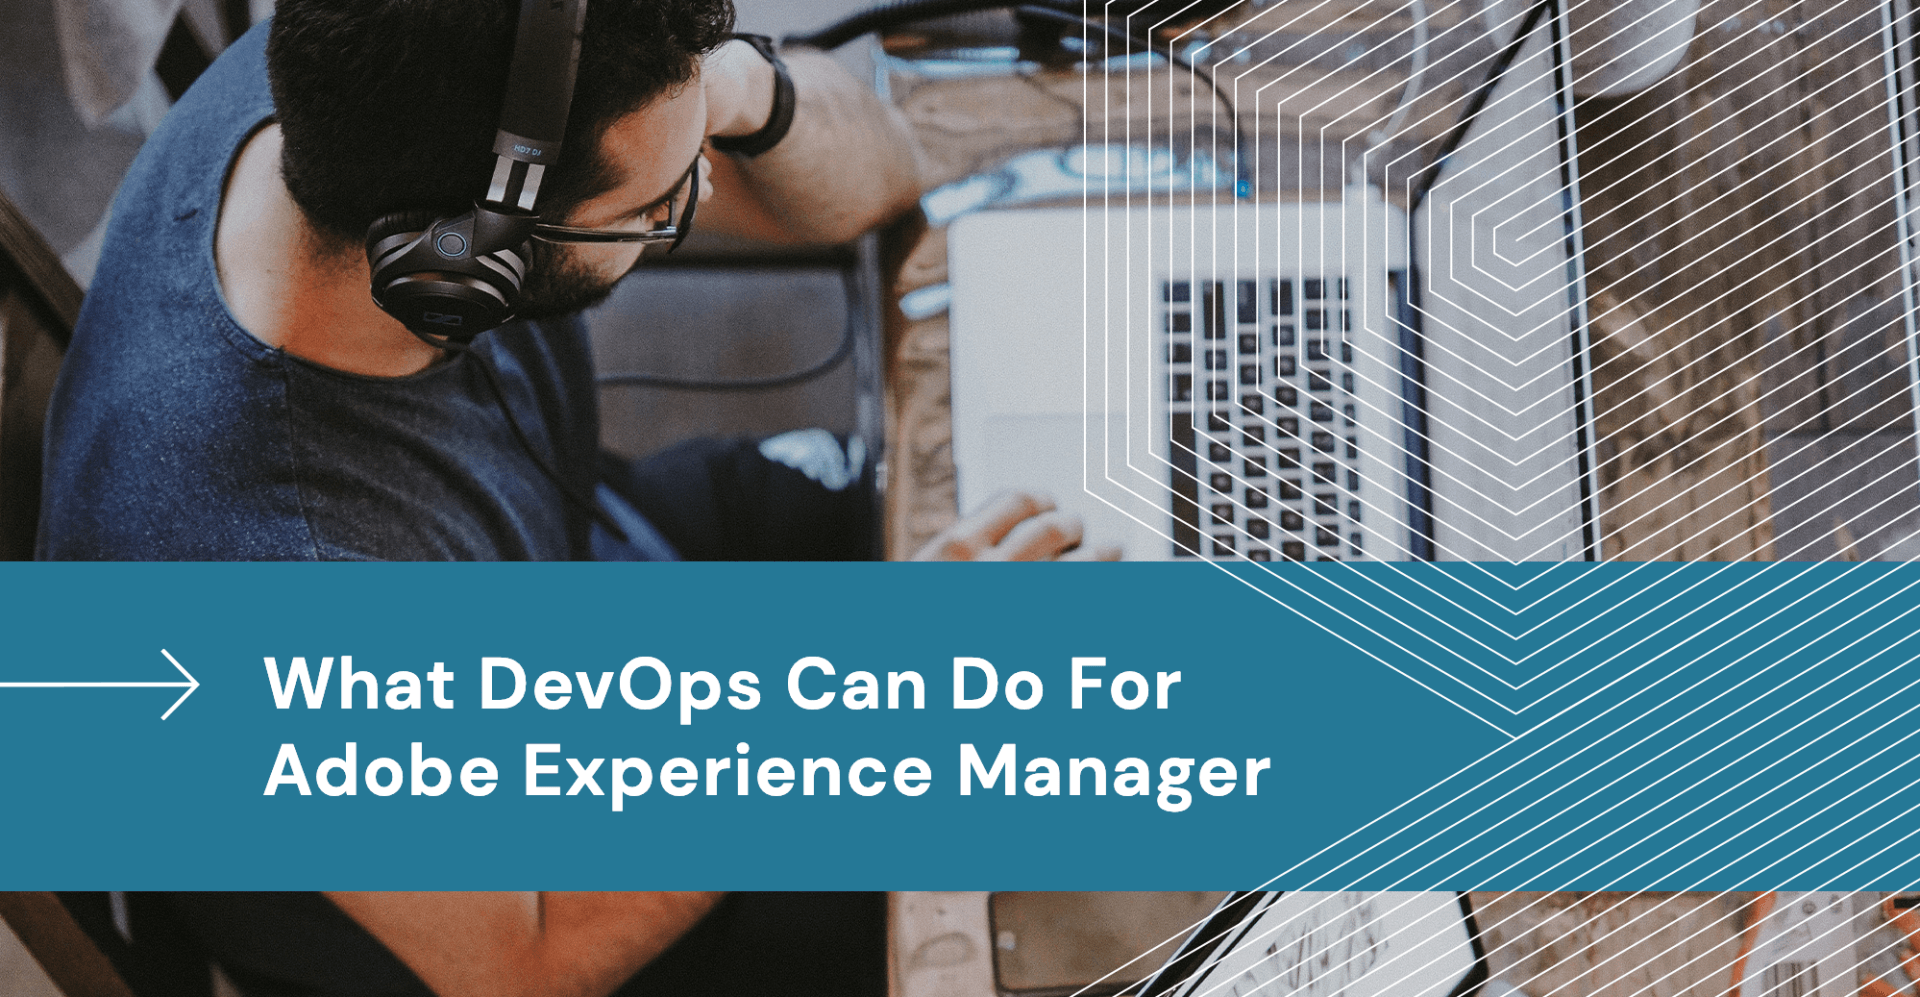 What DevOps Can Do For Adobe Experience Manager